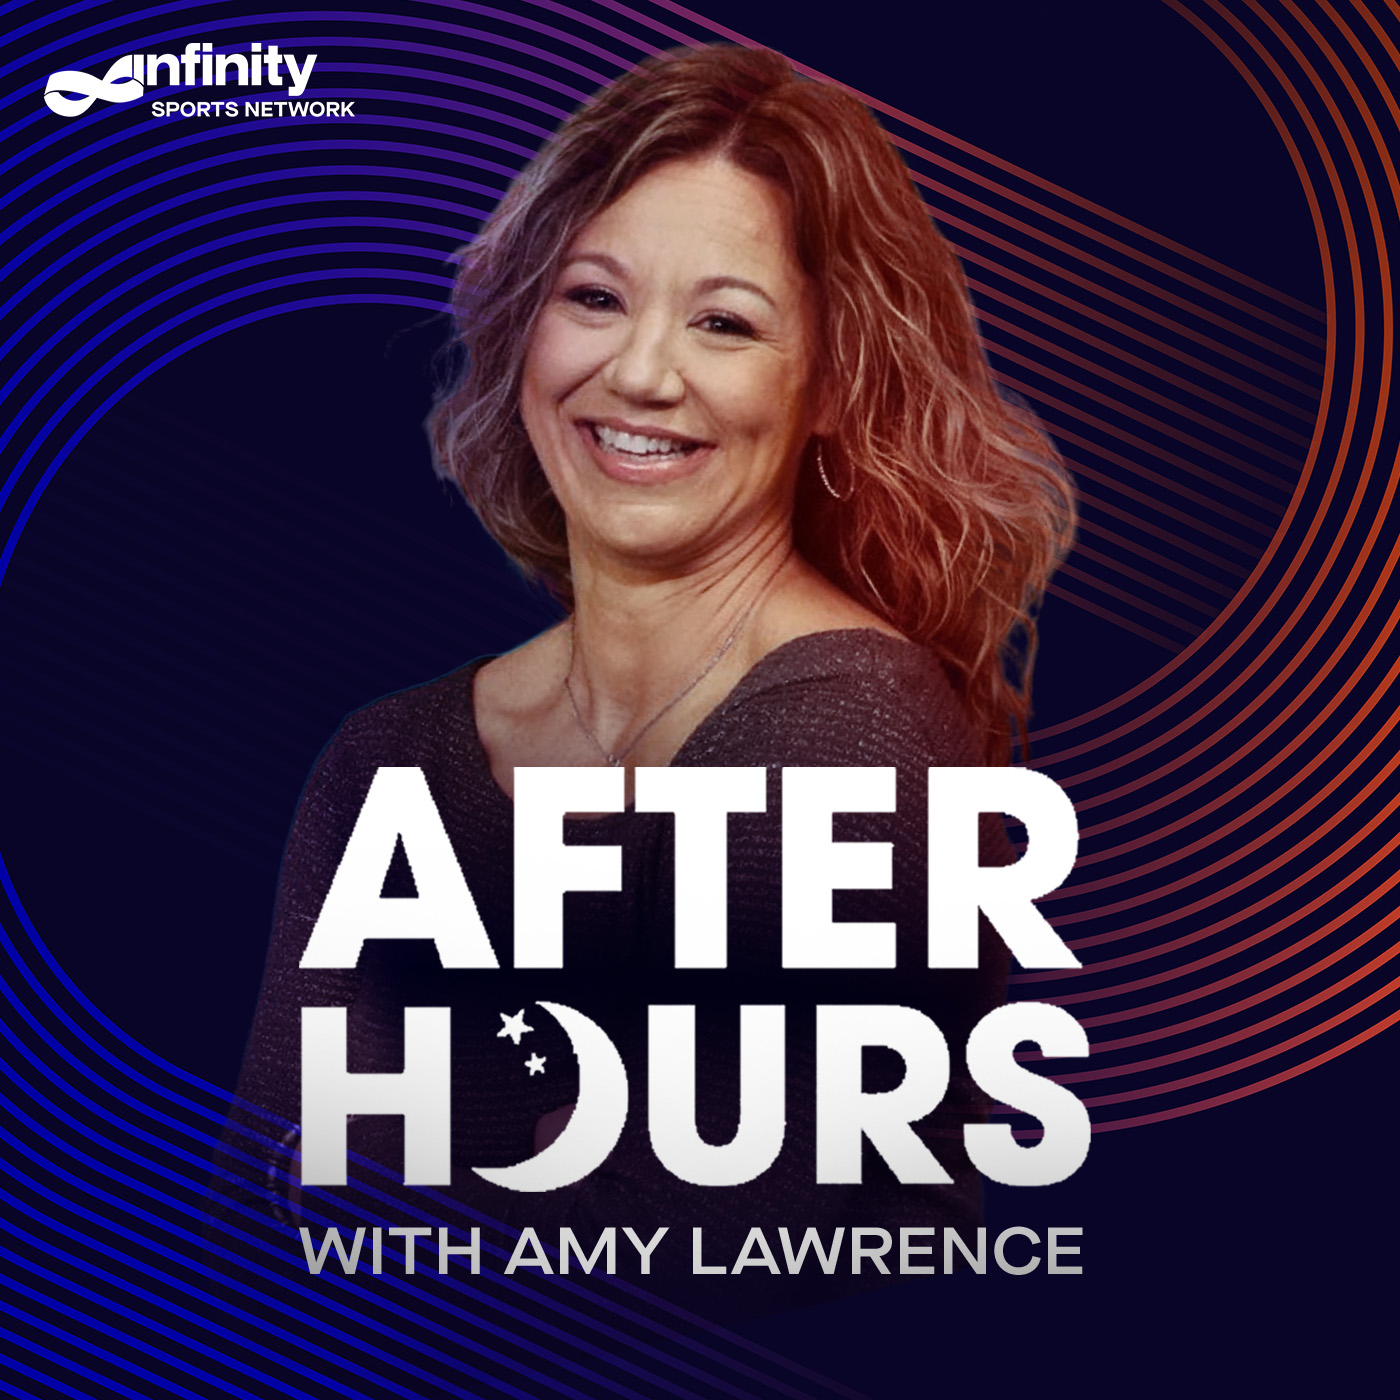 2-22-22 After Hours PODCAST: Hour 4